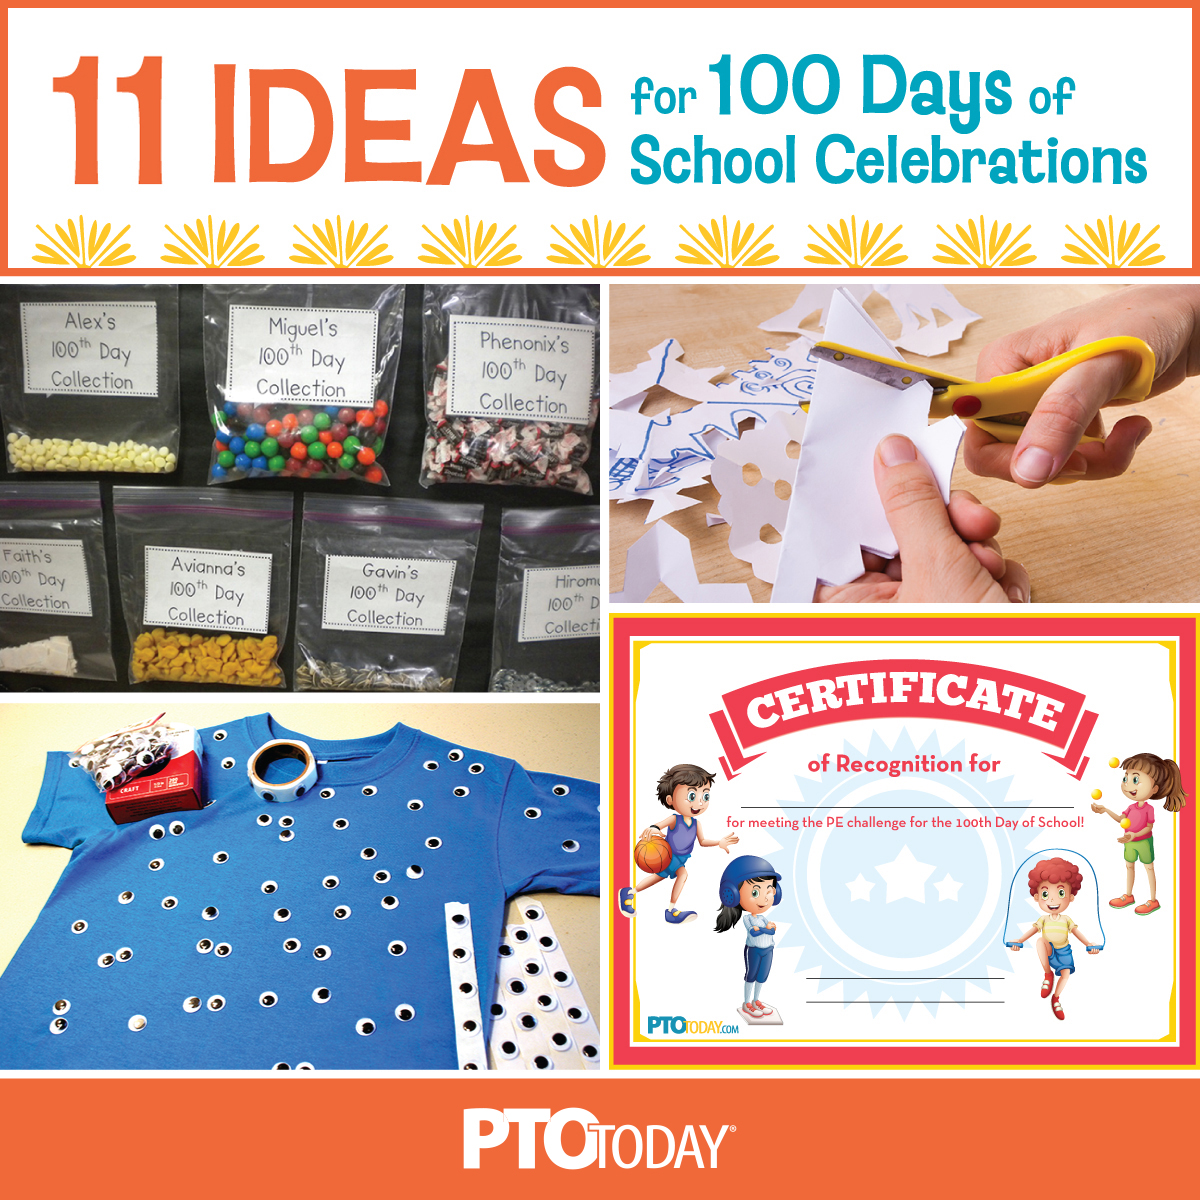 Ways to mark the 100th day of school